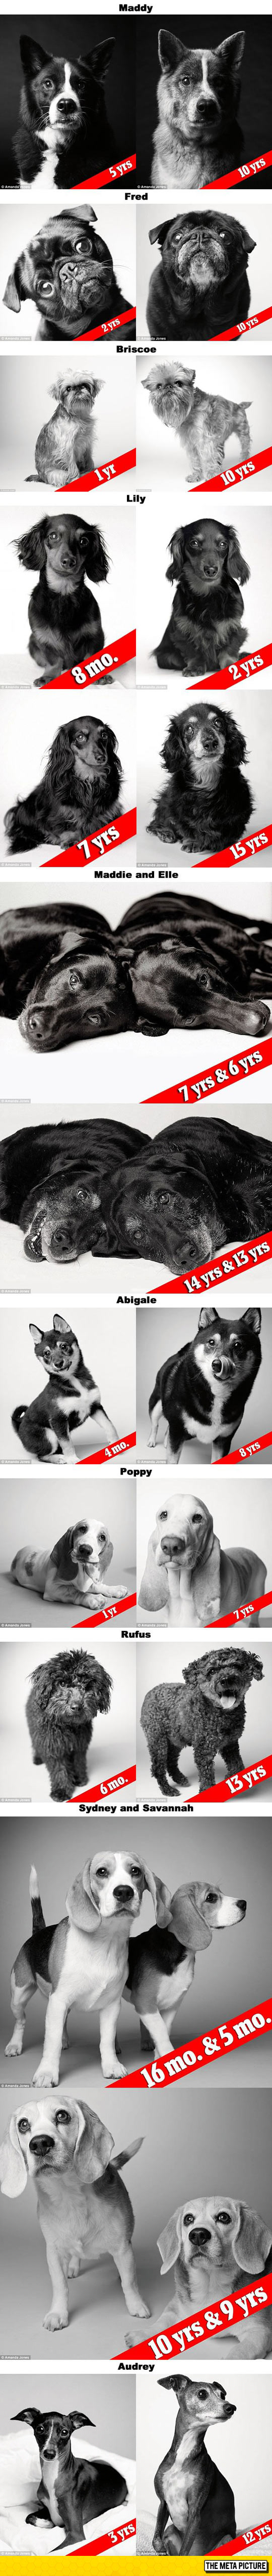 Dog Years Portraits Of Aging Dogs That Will Melt Your Heart (by Photographer Amanda Jones)